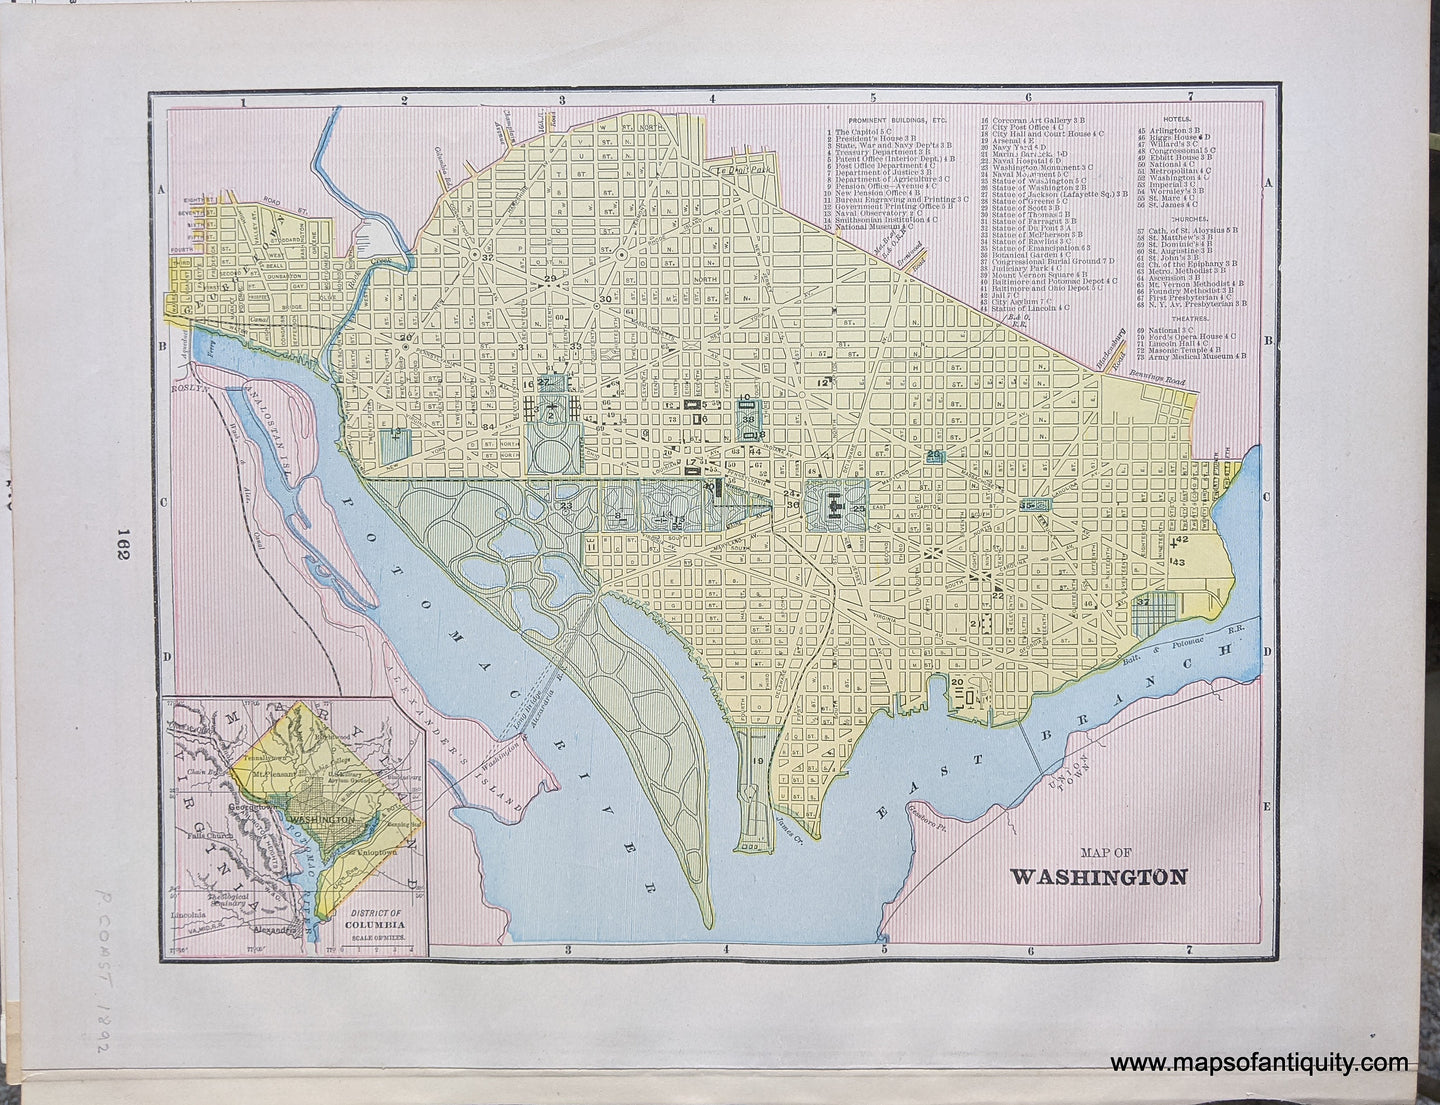 Genuine-Antique-Printed-Color-Comparative-Chart-Map-of-Washington-DC;-versos:-New-Driving-Map-of-Philadelphia-Baltimore-United-States-Mid-Atlantic-1892-Home-Library-&-Supply-Association-Maps-Of-Antiquity-1800s-19th-century